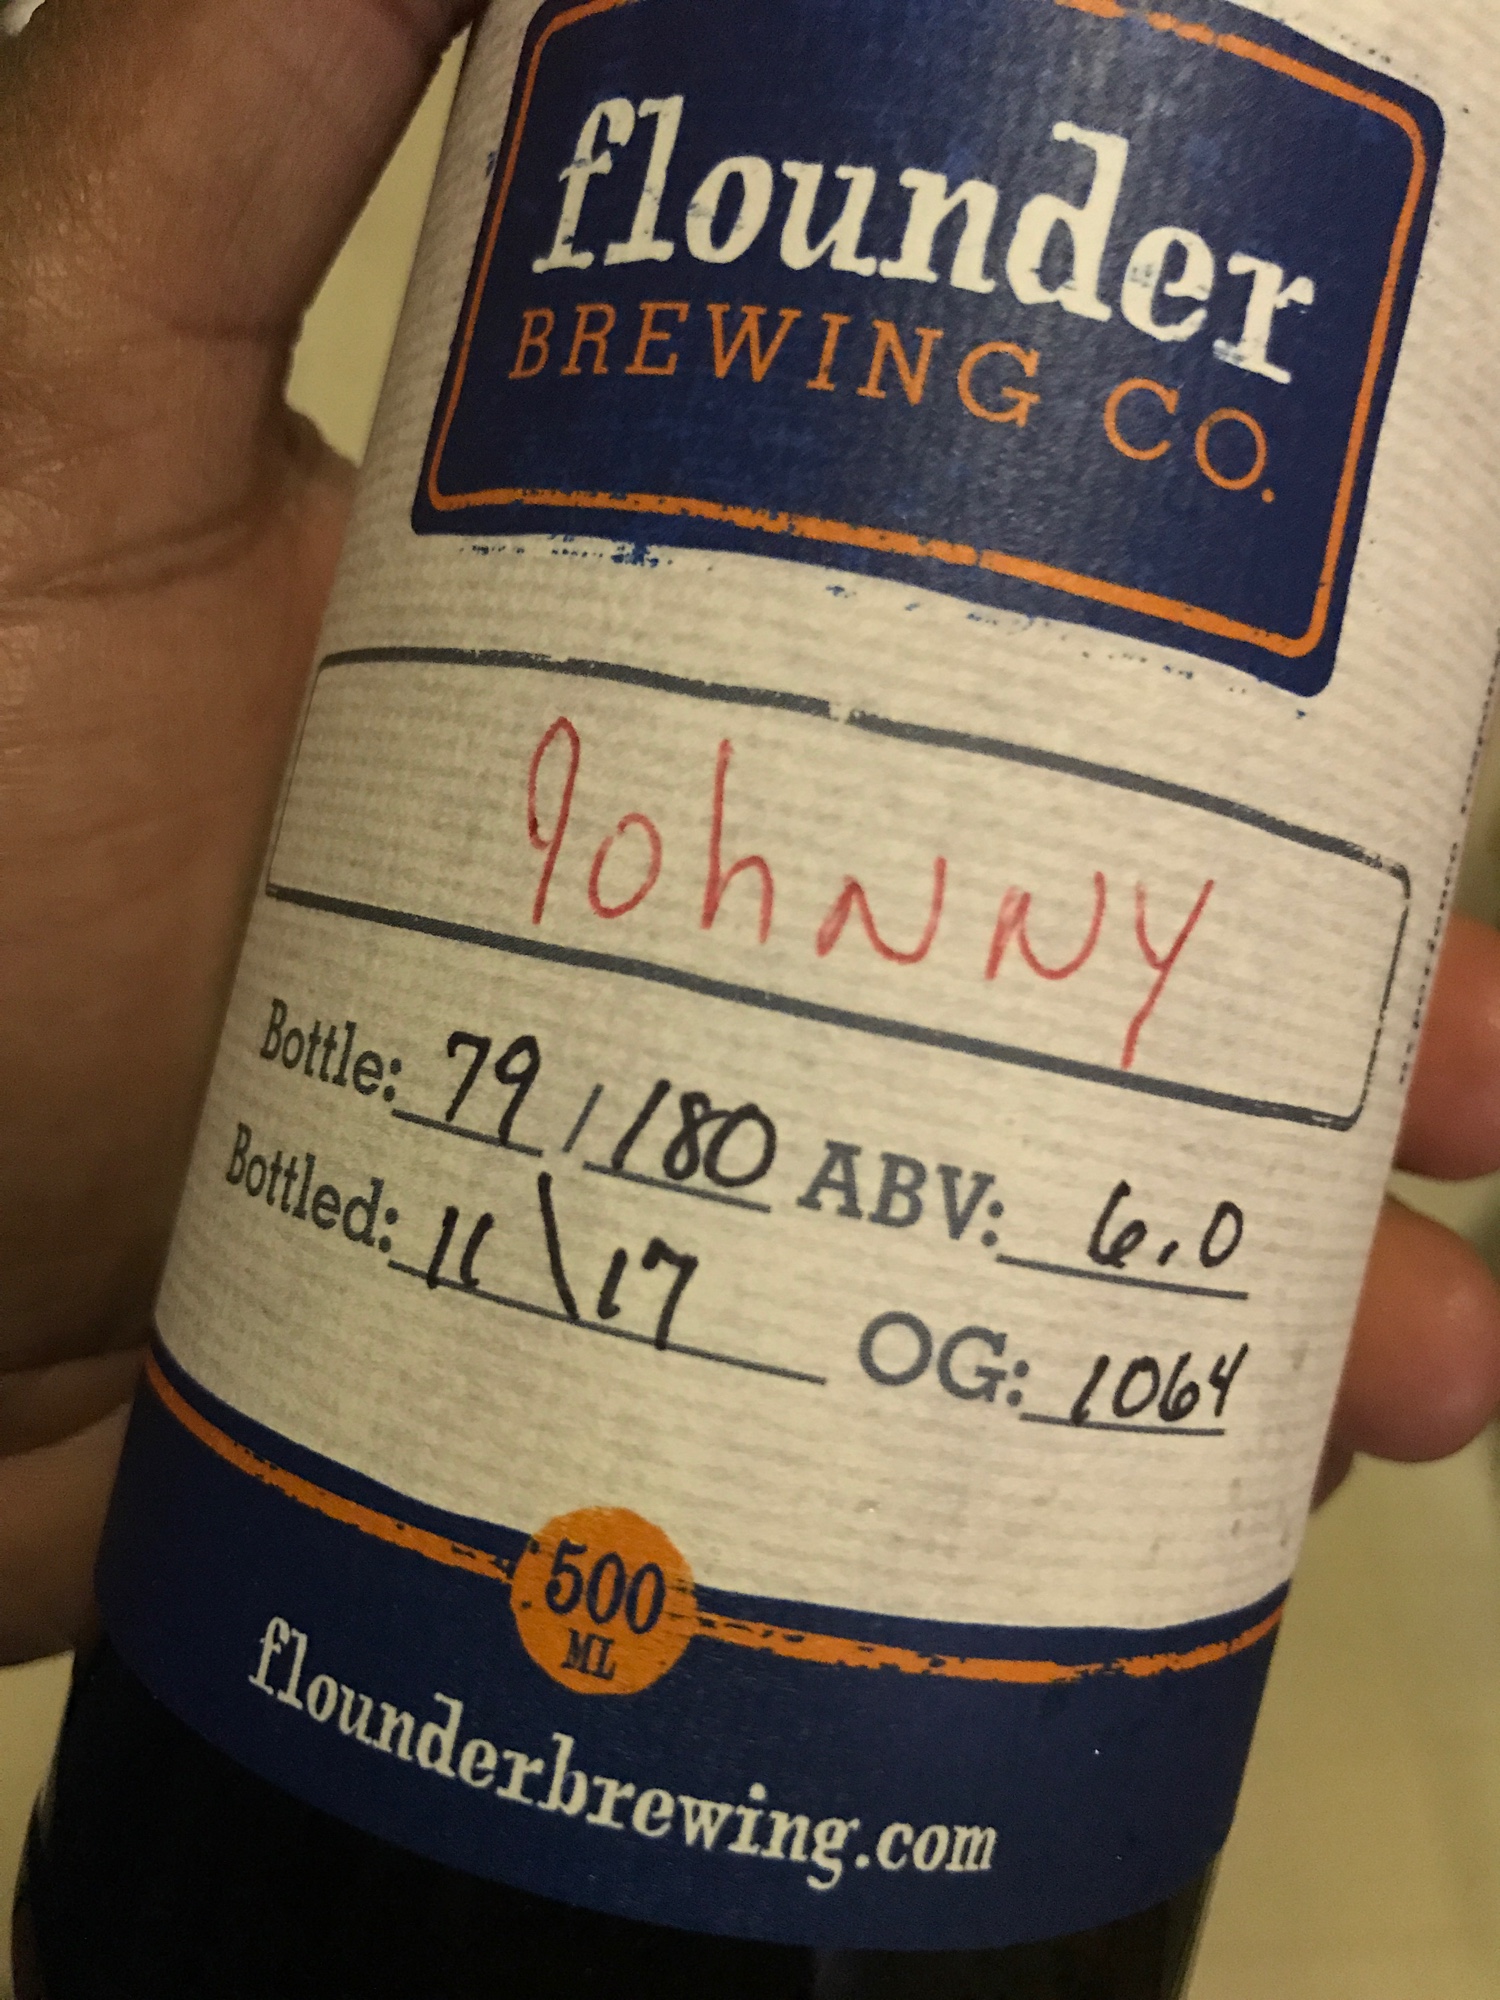 Drinking a Johnny by Flounder Brewing Co